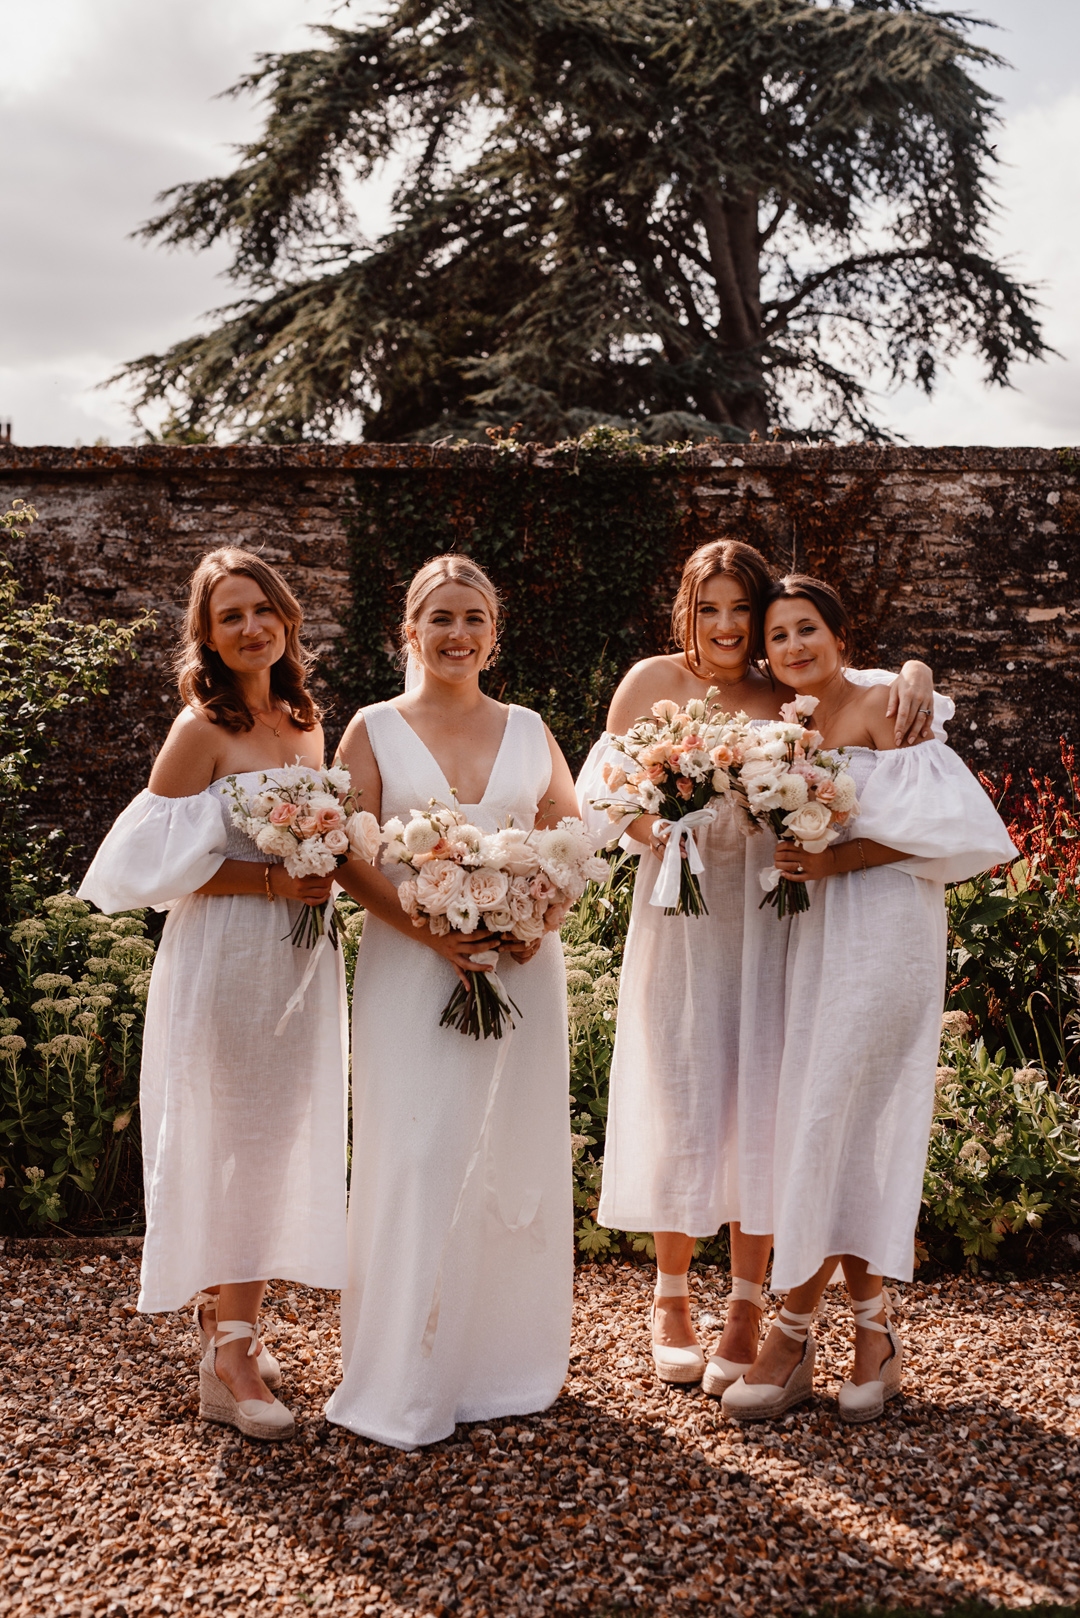 The Own Studio wedding dress. Bridesmaids all in white.